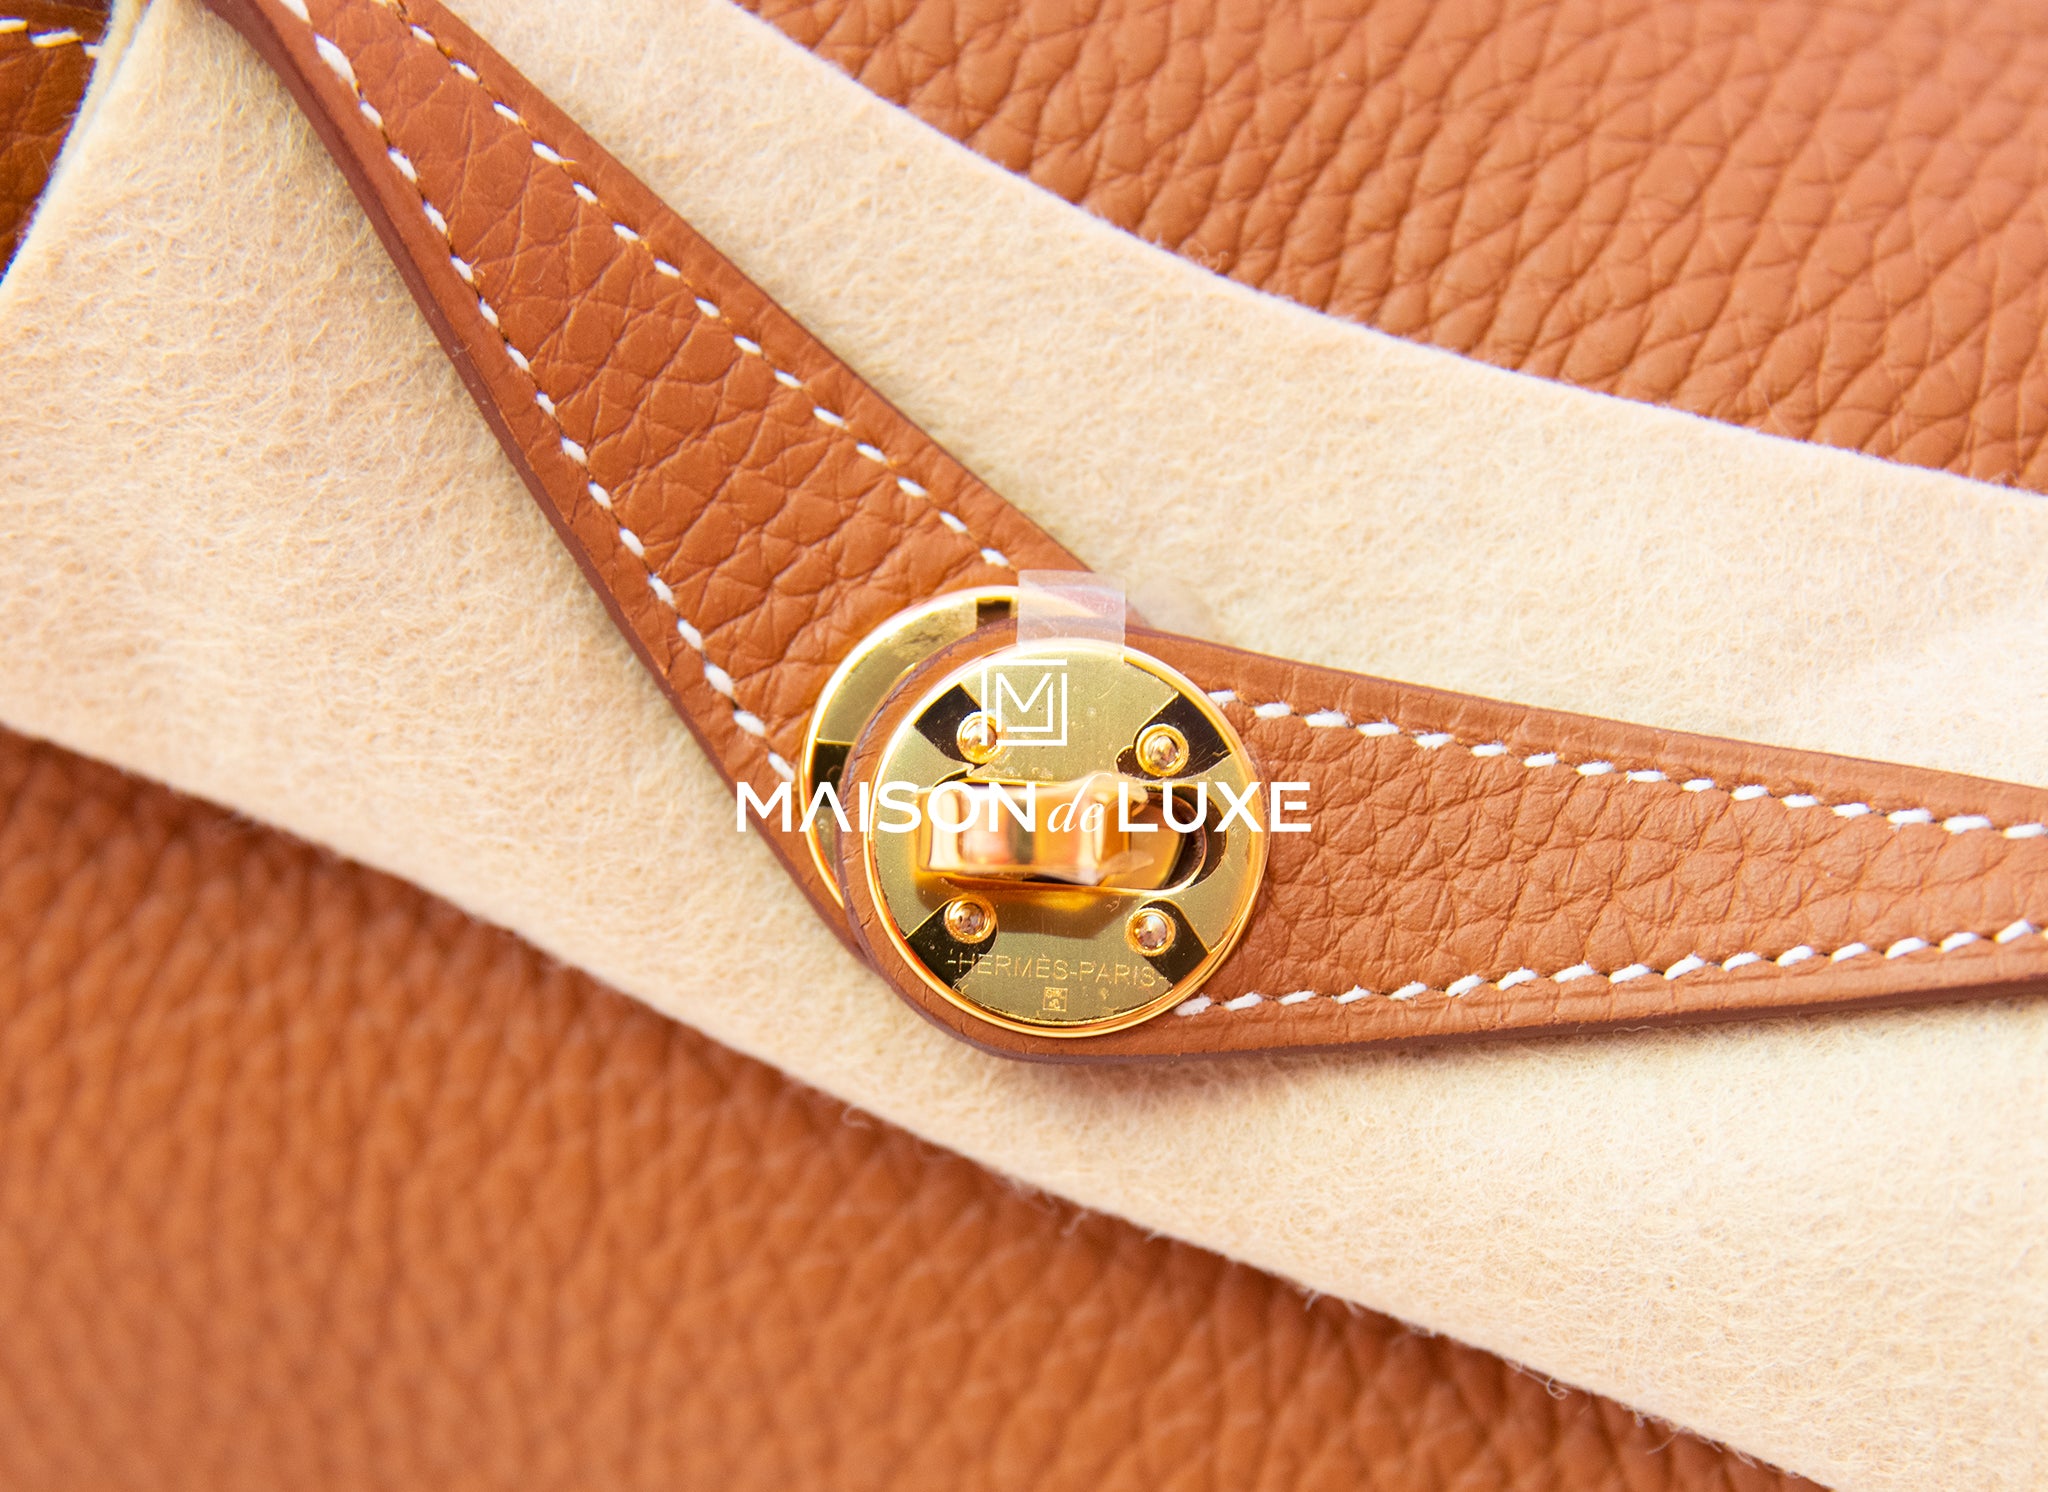 Hermes Mini Lindy Biscuit Taurillon Clemence Ghw B